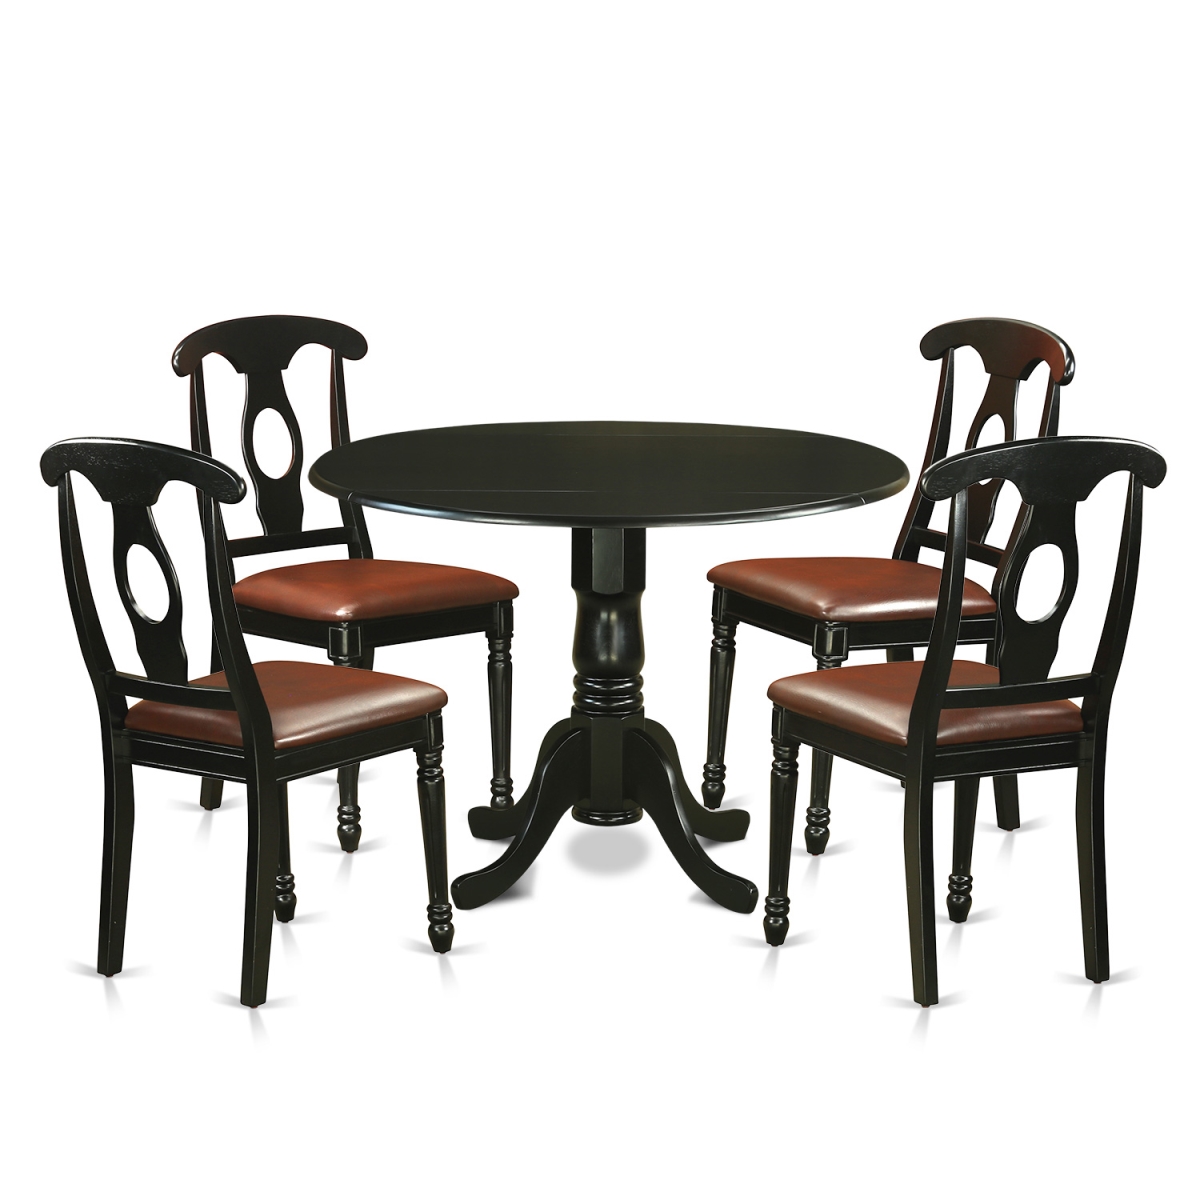 Picture of East West Furniture DLKE5-BLK-LC Dinette Table Set - Small Kitchen Table & 4 Chairs, Black - 5 Piece